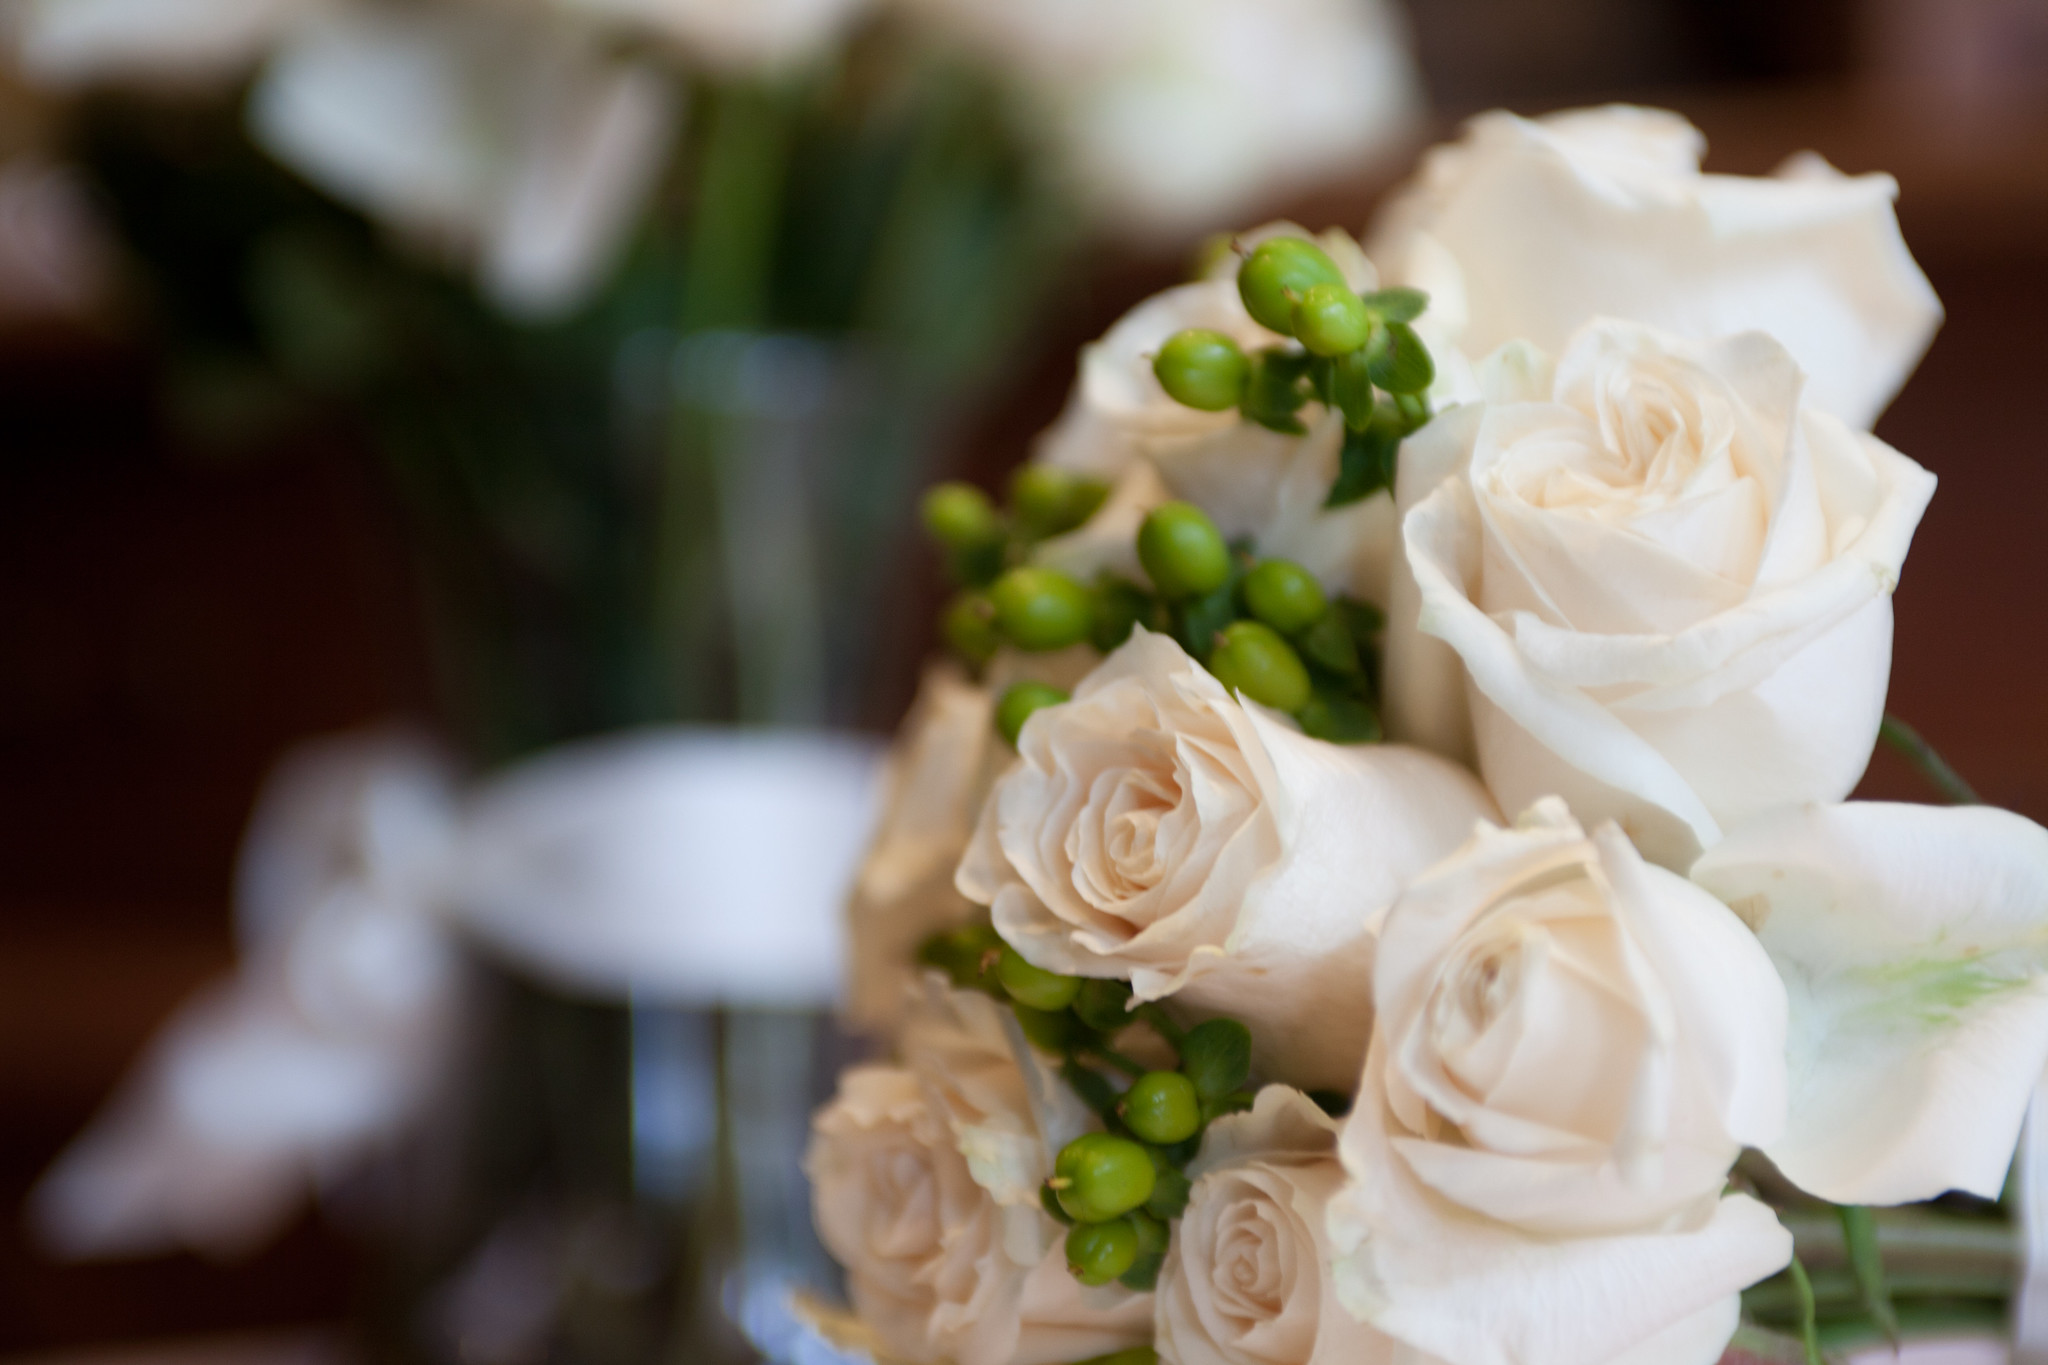 A wedding bouquet of white and light pink roses